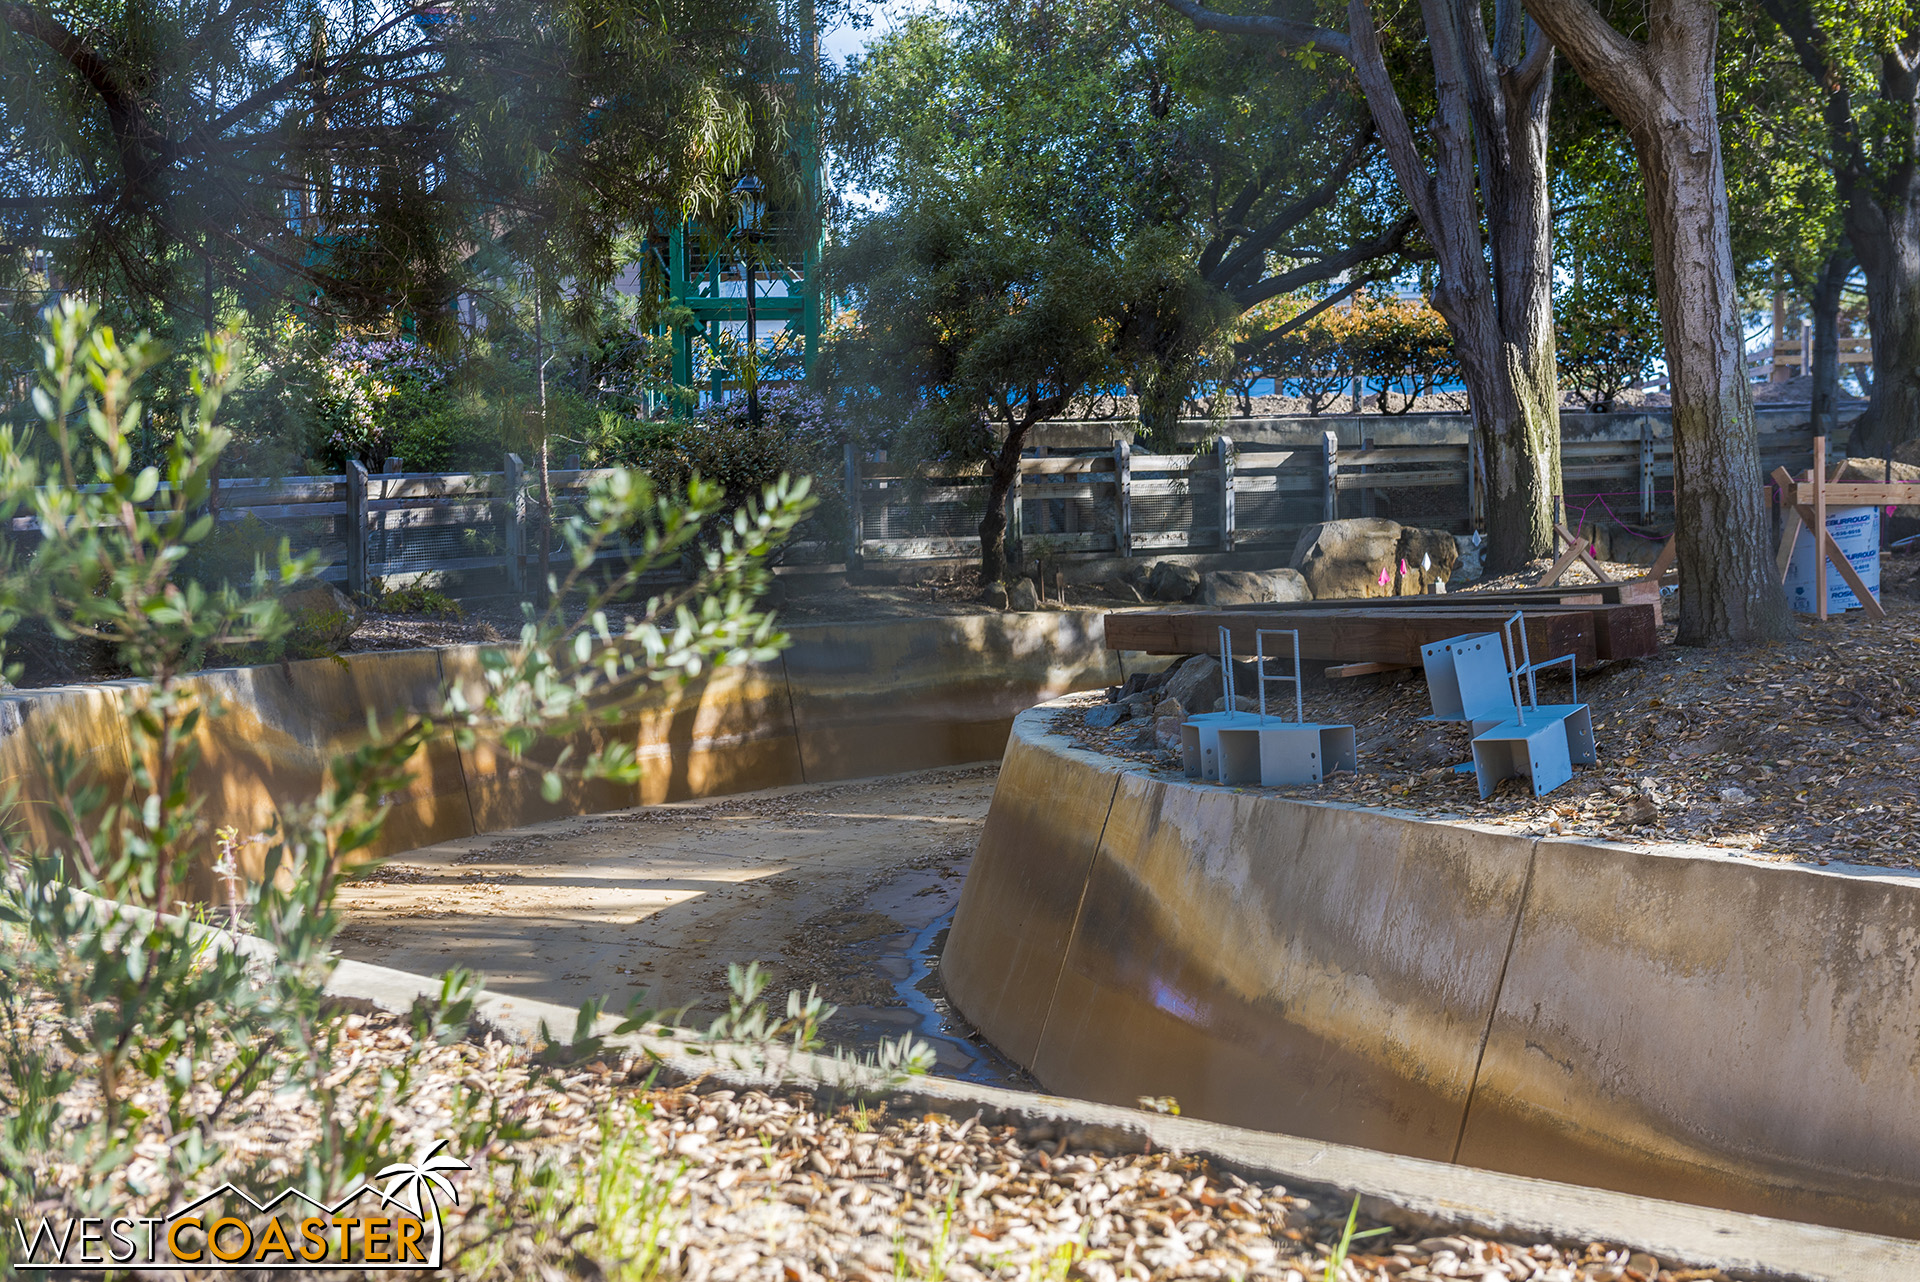  The flume has been completely drained, revealing that this is not a real river rapids! 